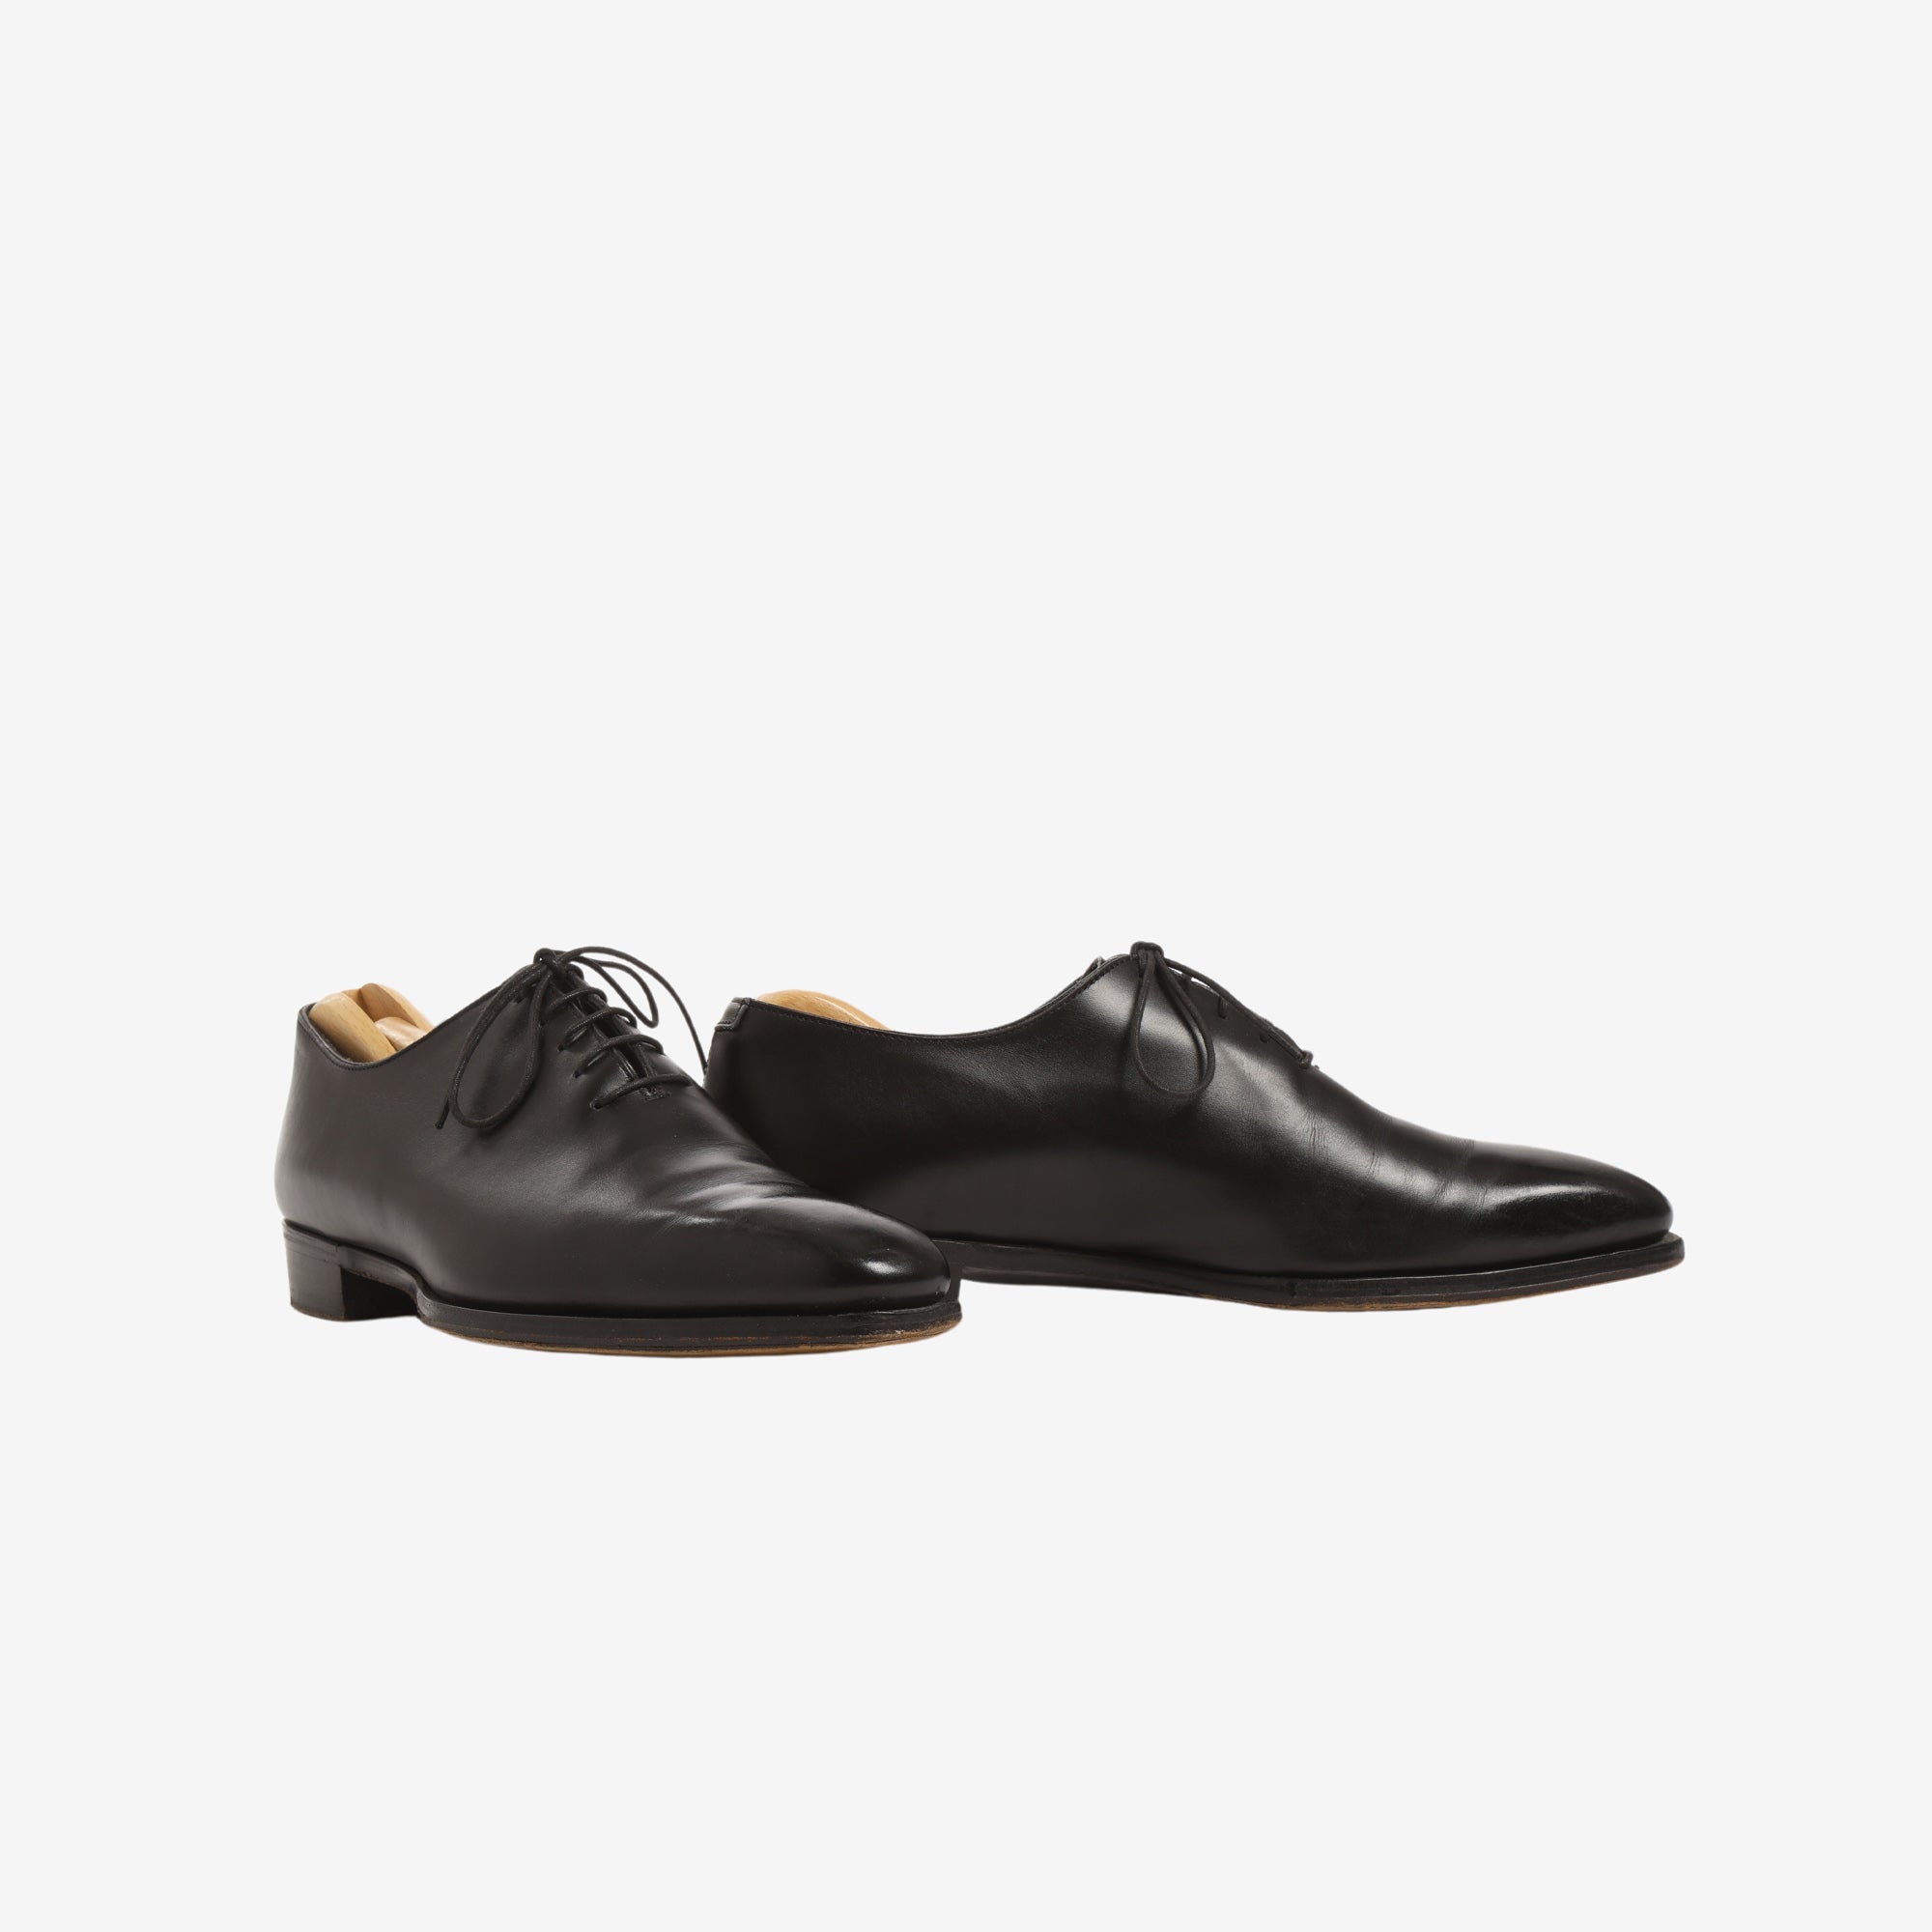 Merlin Leather Oxford Shoes